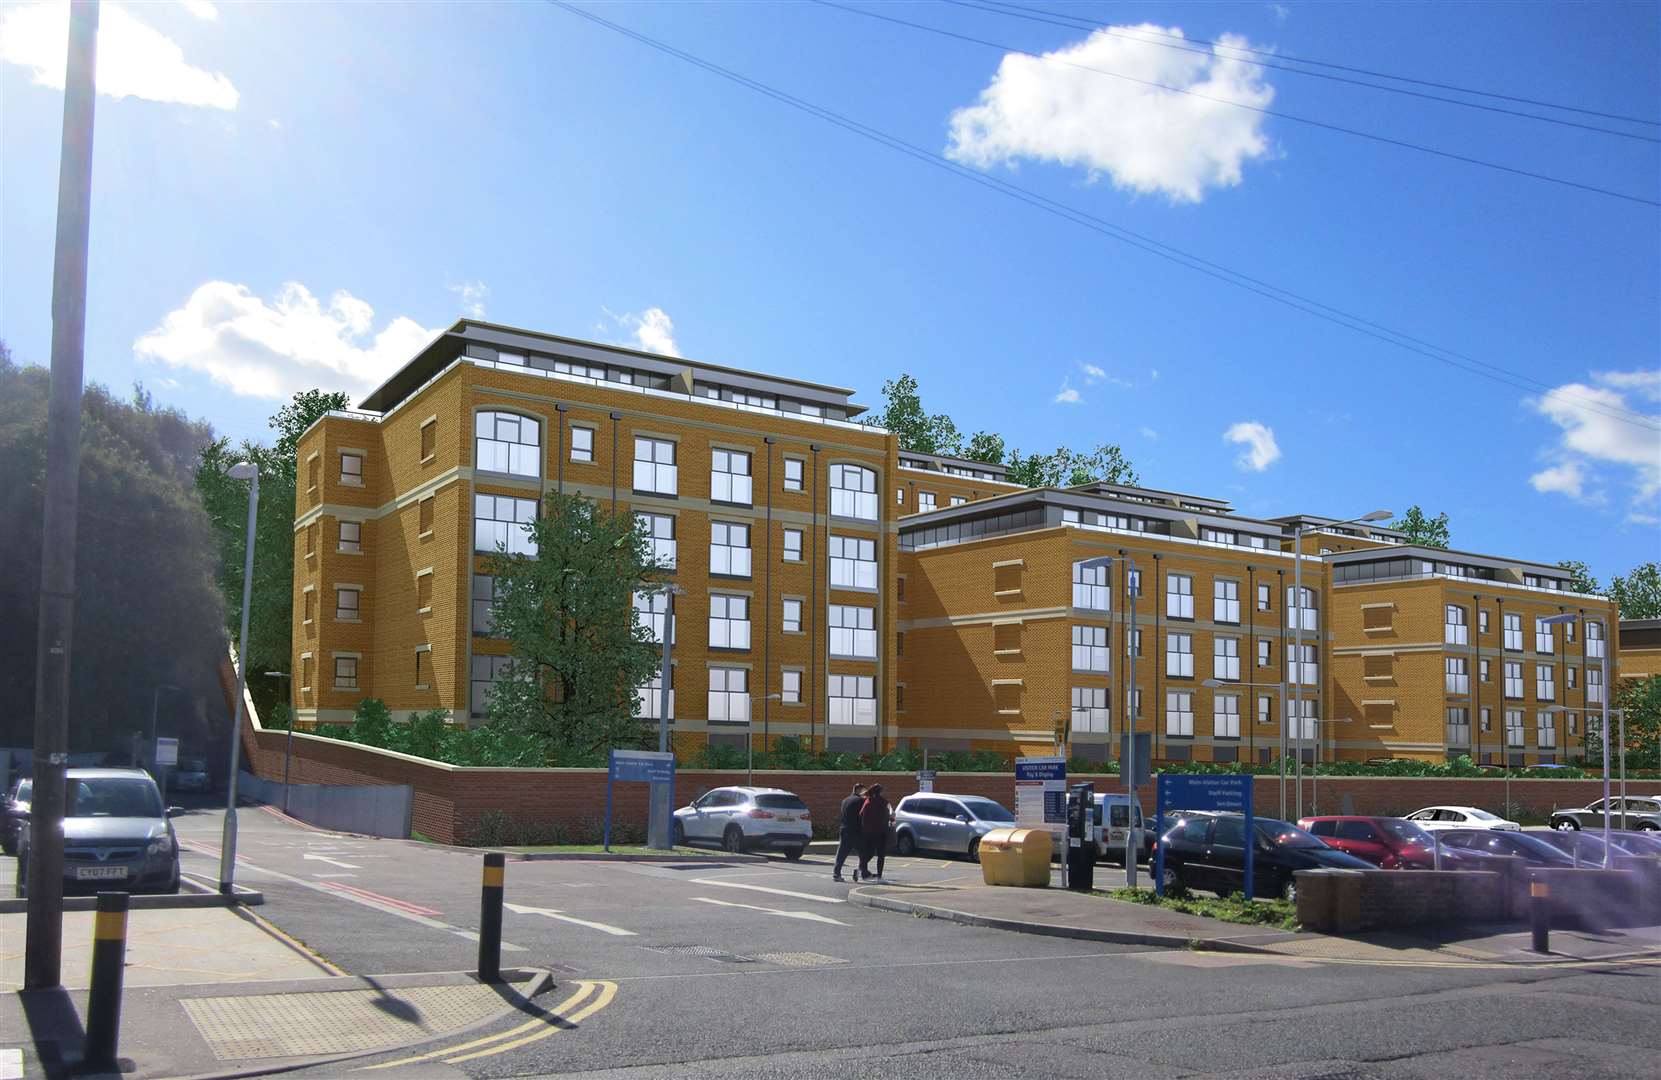 How the new flats will look. Picture: Beanland Associates Architects